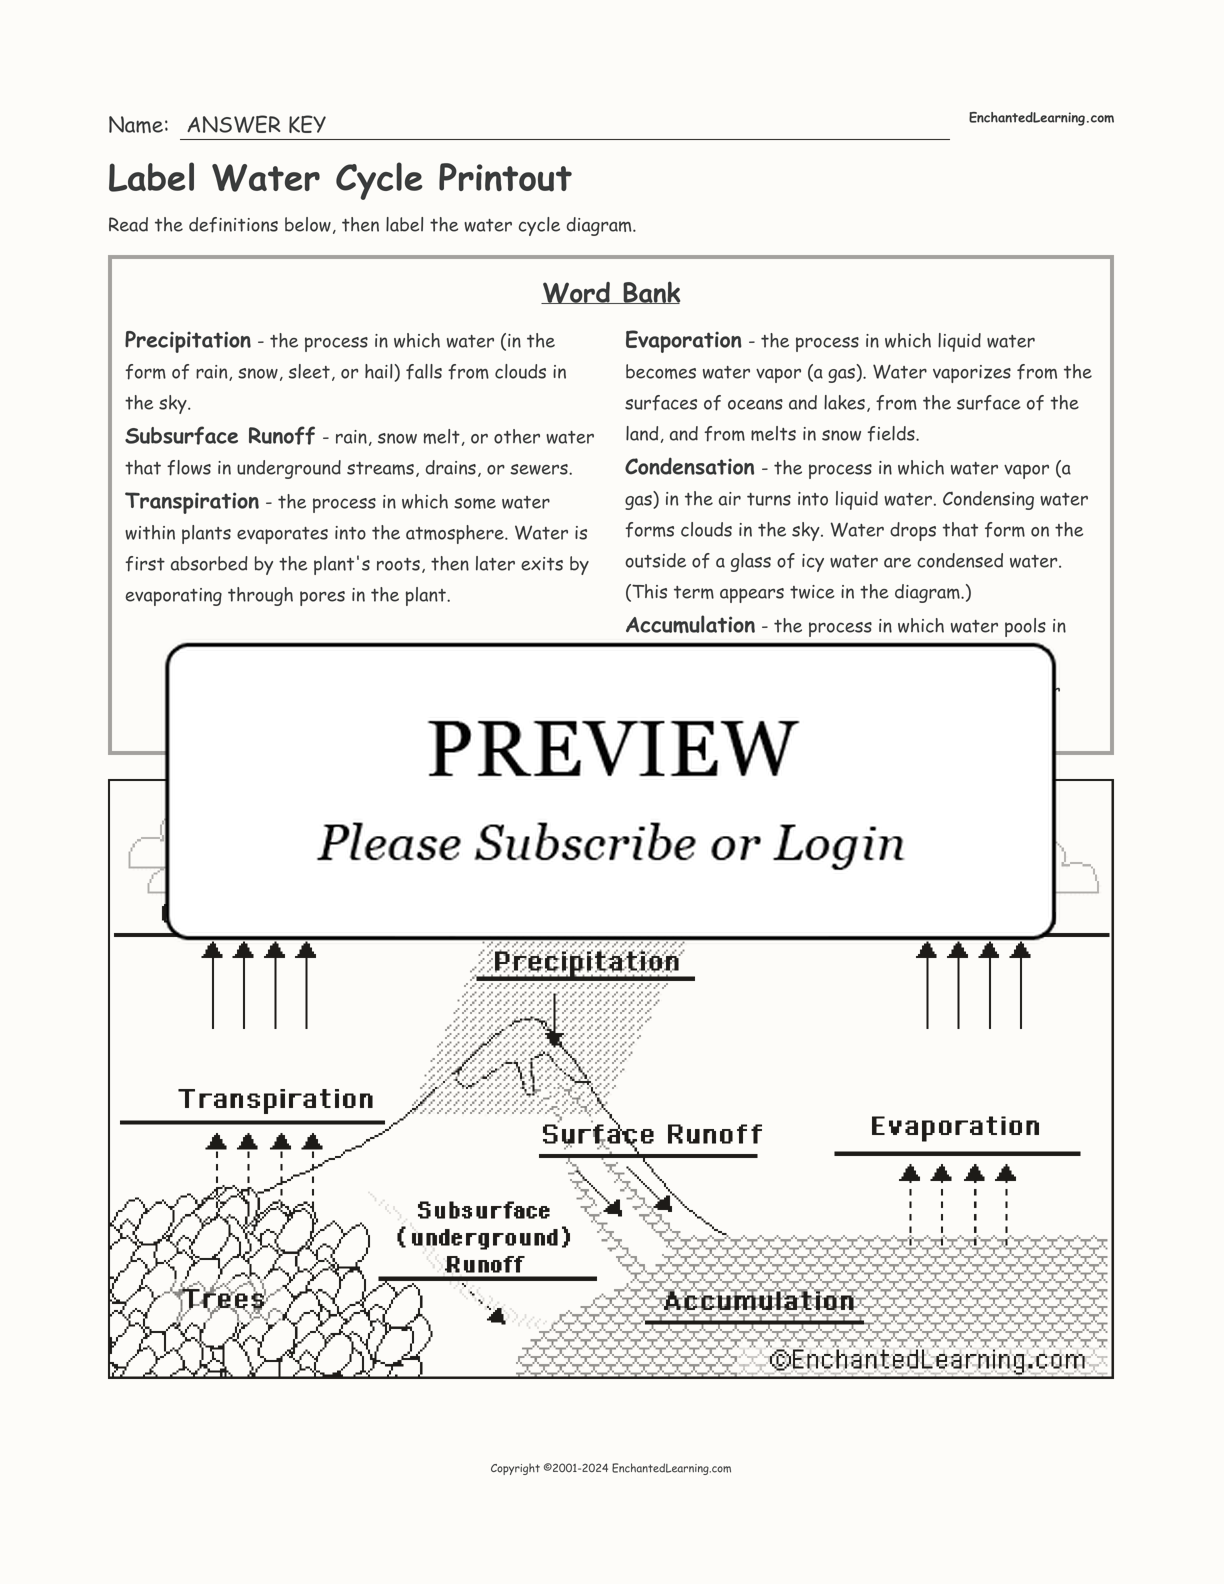 Label Water Cycle Printout interactive worksheet page 2